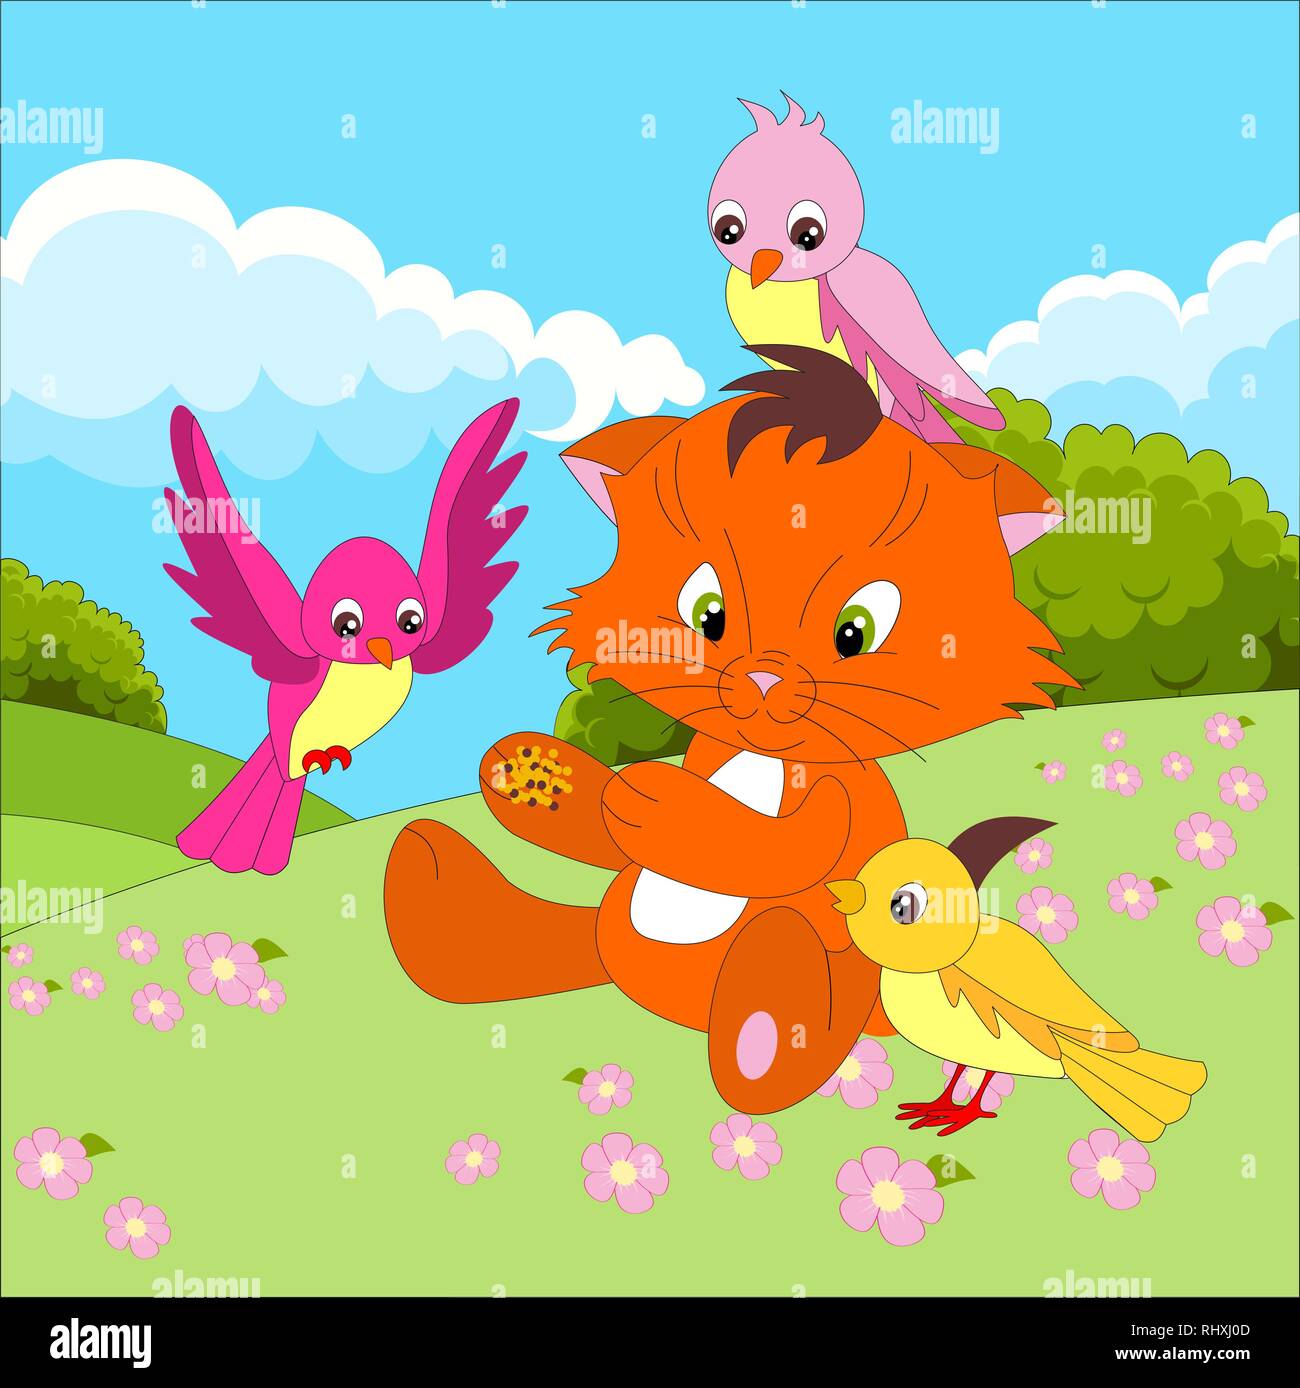 Cute cat cartoon character with birds eating from a hand on the background of a cartoon outdoors landscape, meadows Stock Photo